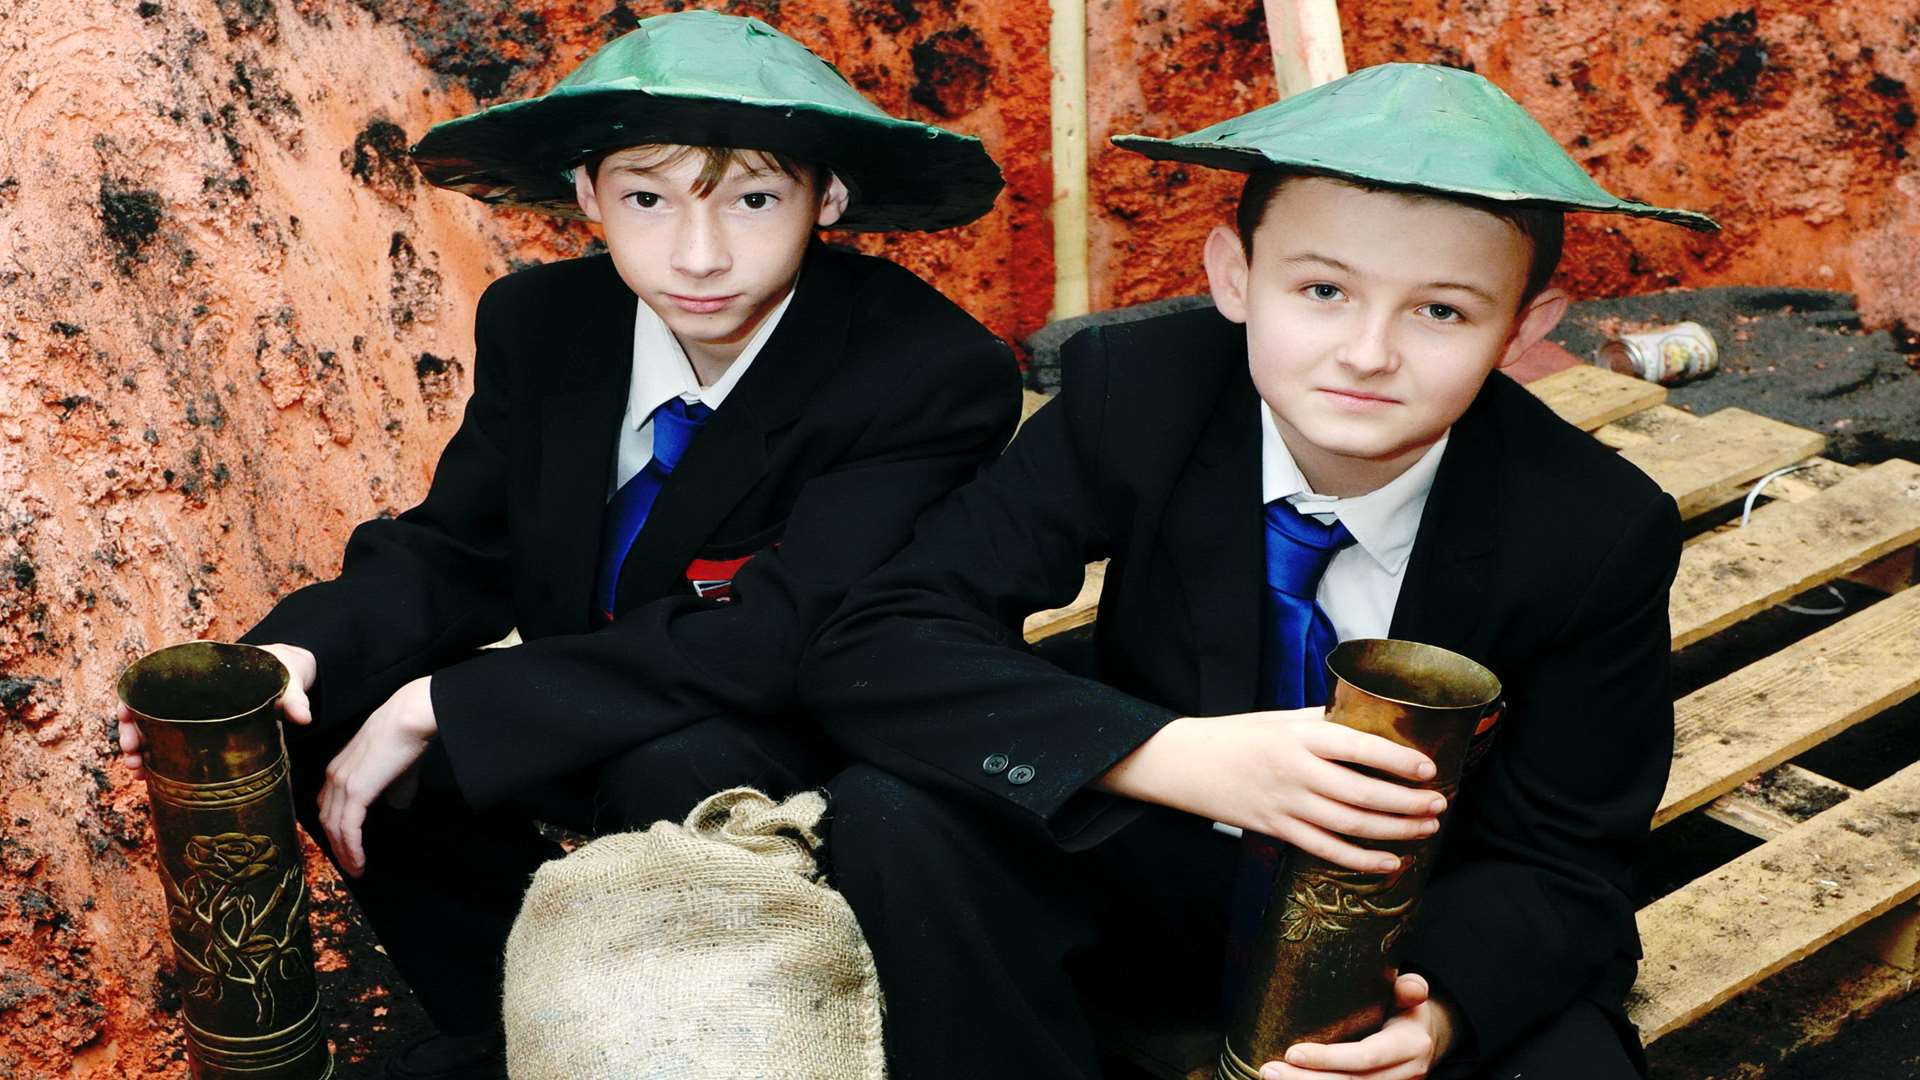 Joshua Packman, 12, and Albert Hauxwell, 11, in the trench at the academy